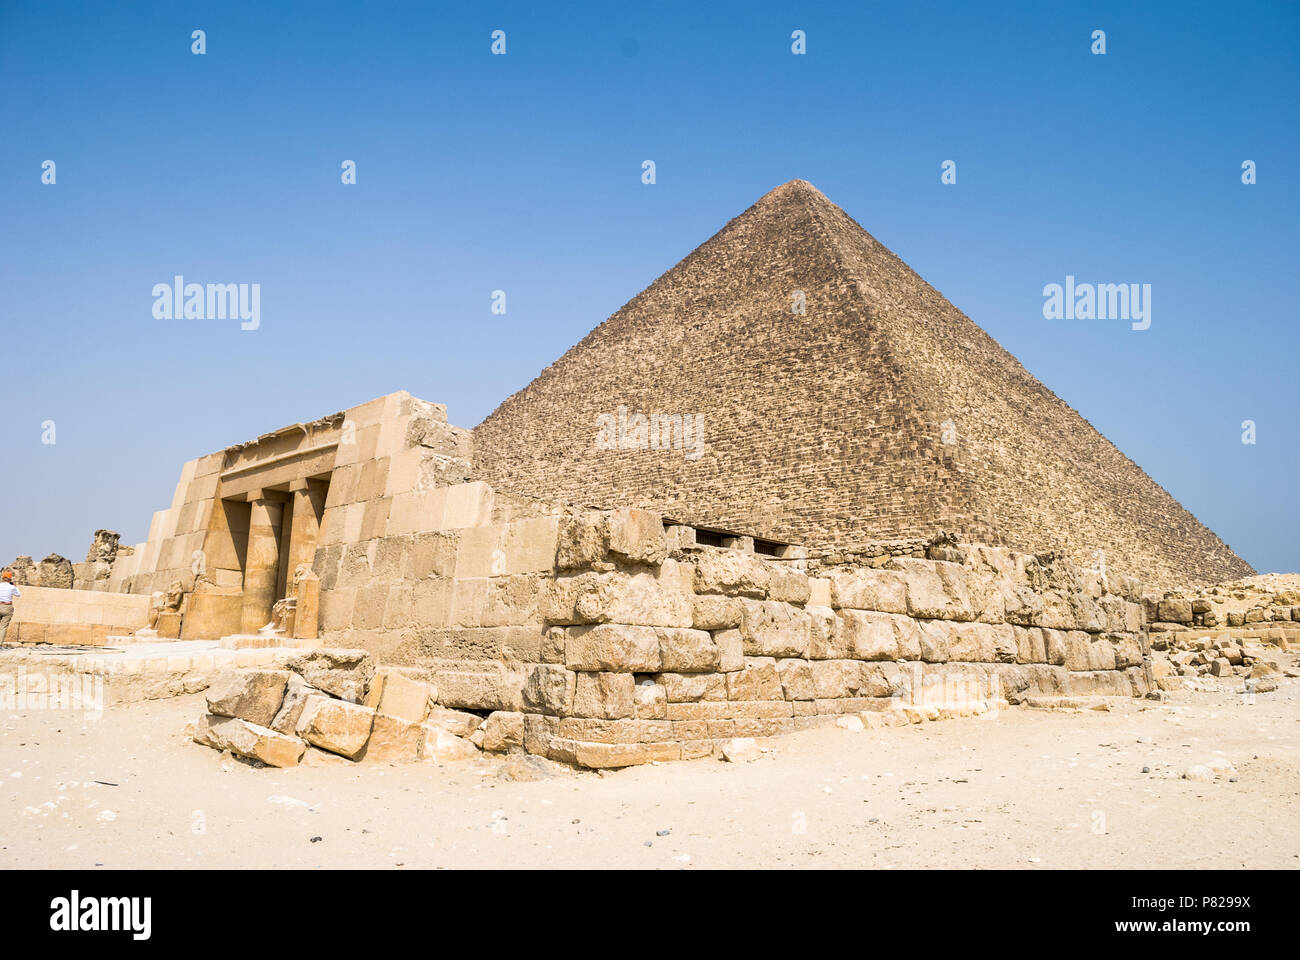 view of Great Pyramid of Giza, Egypt Stock Photo